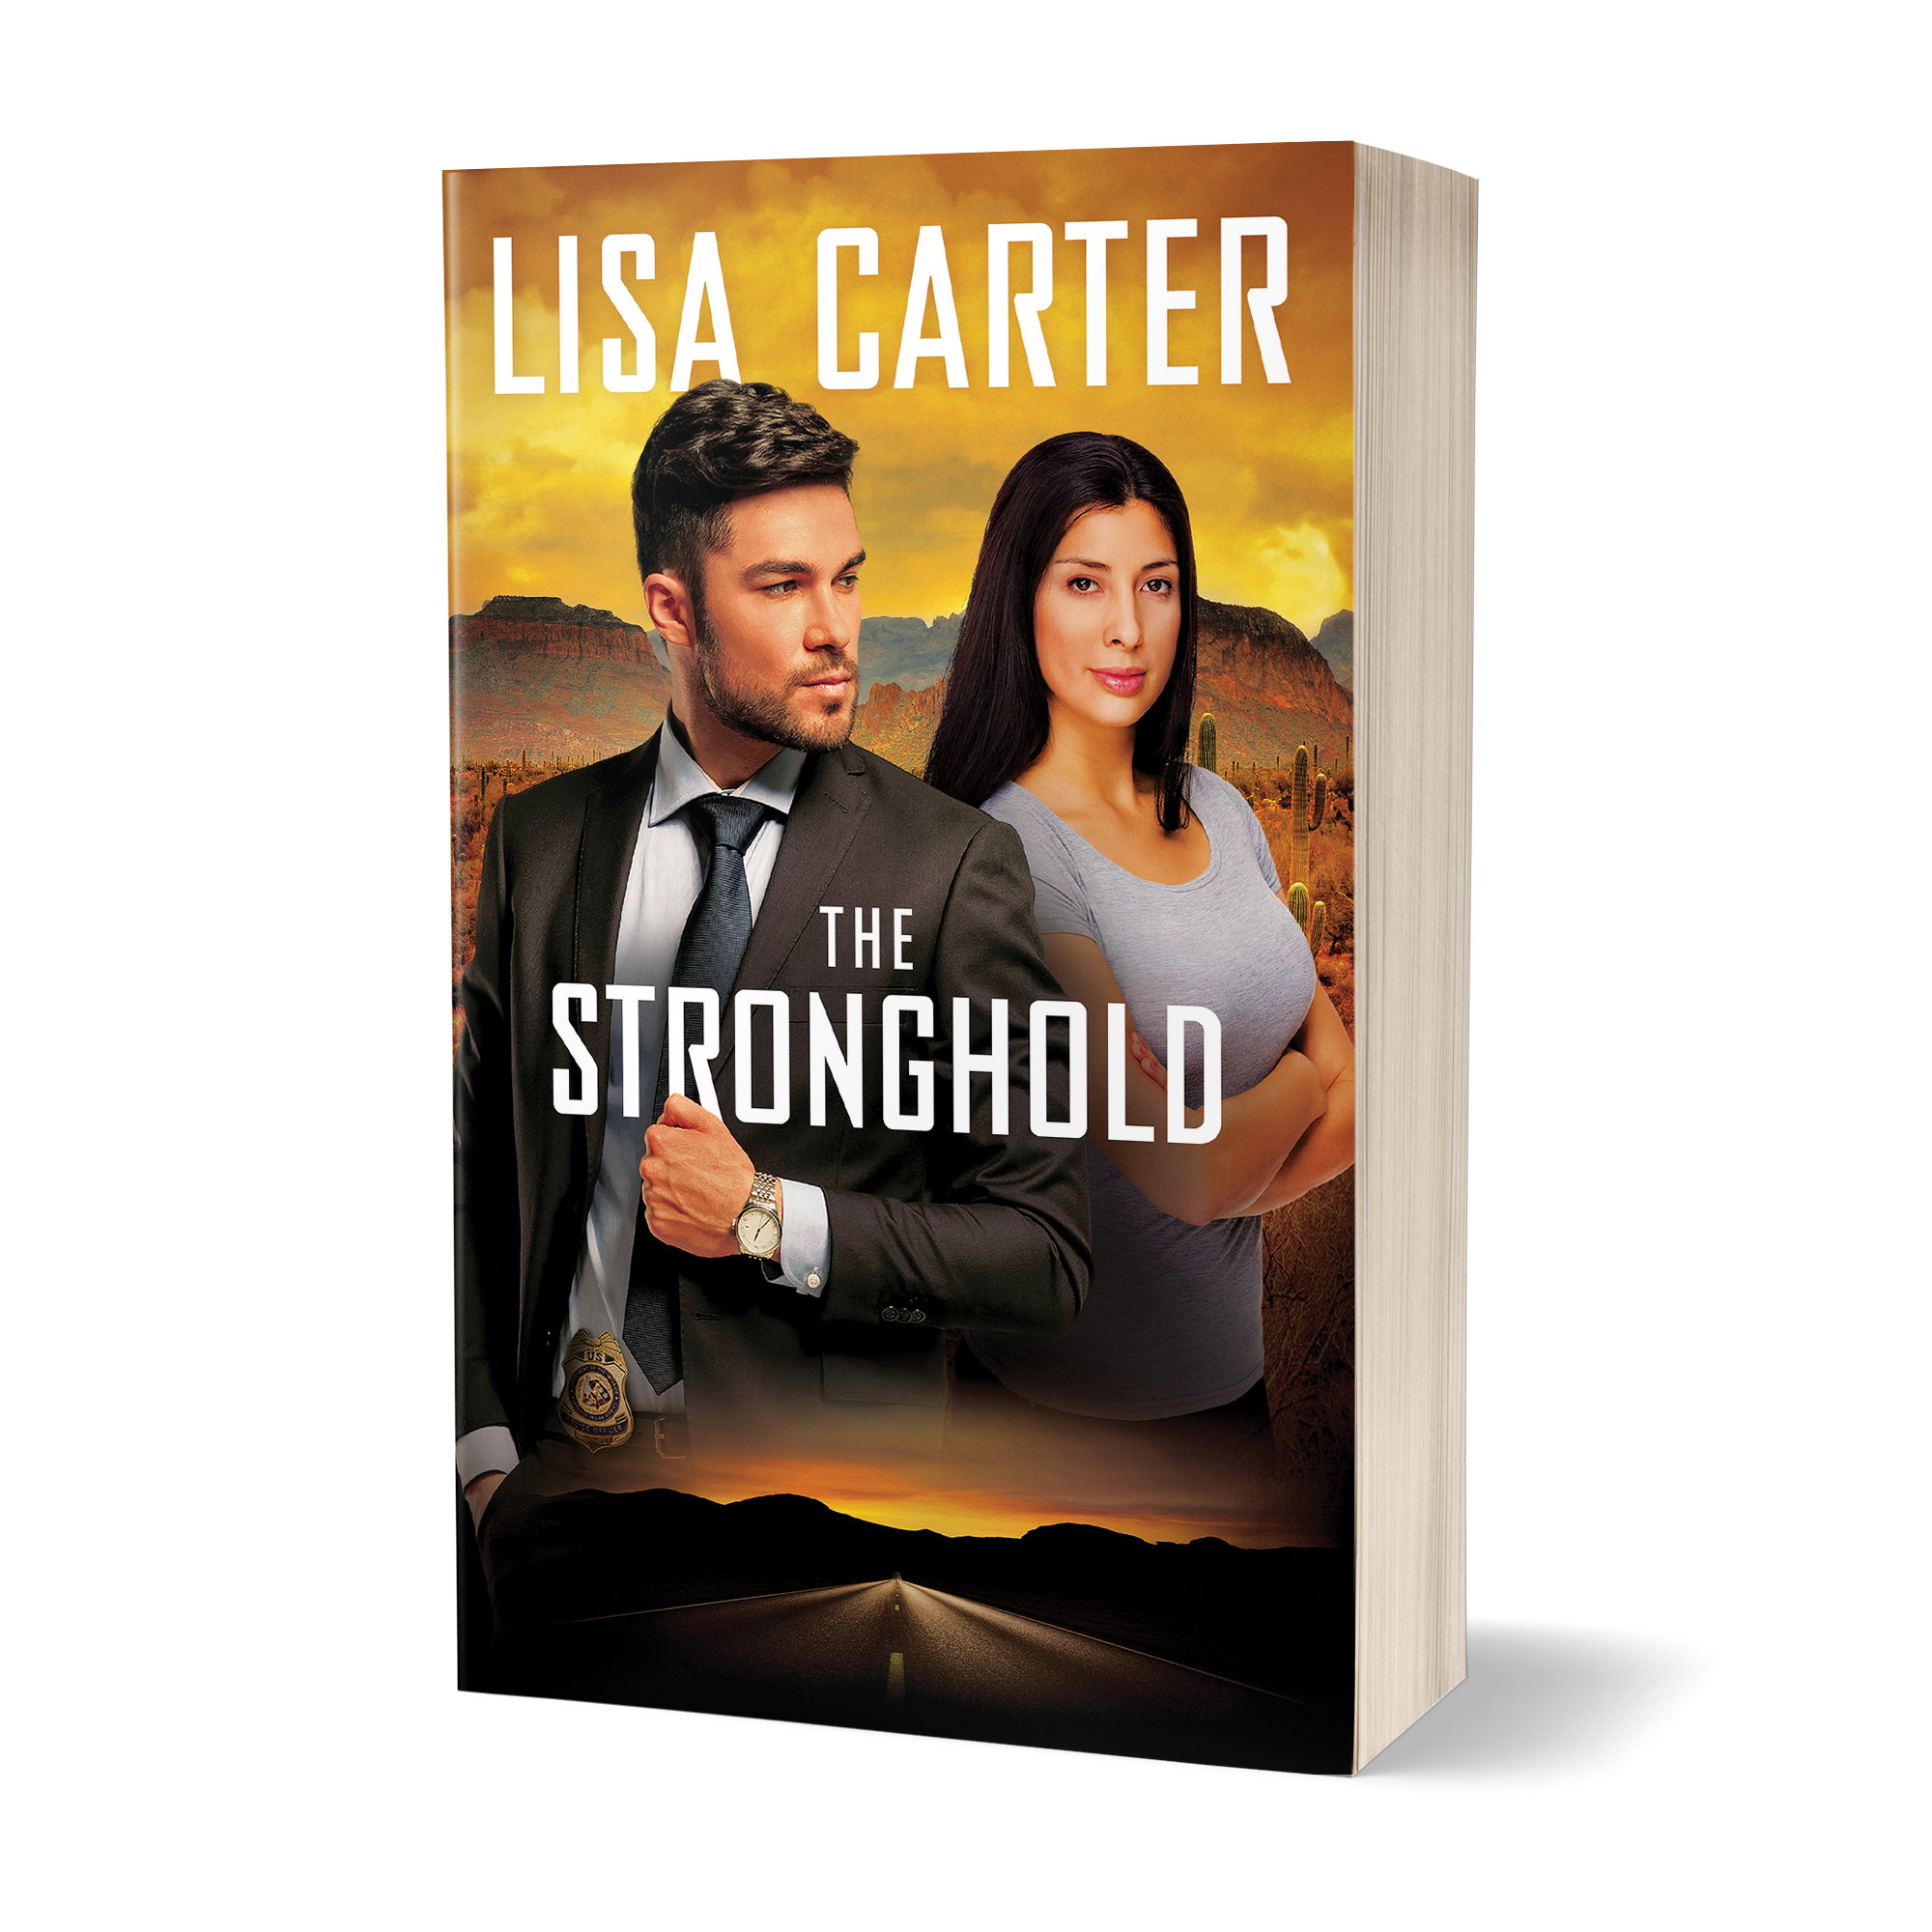  The Stronghold - Lisa Carter 